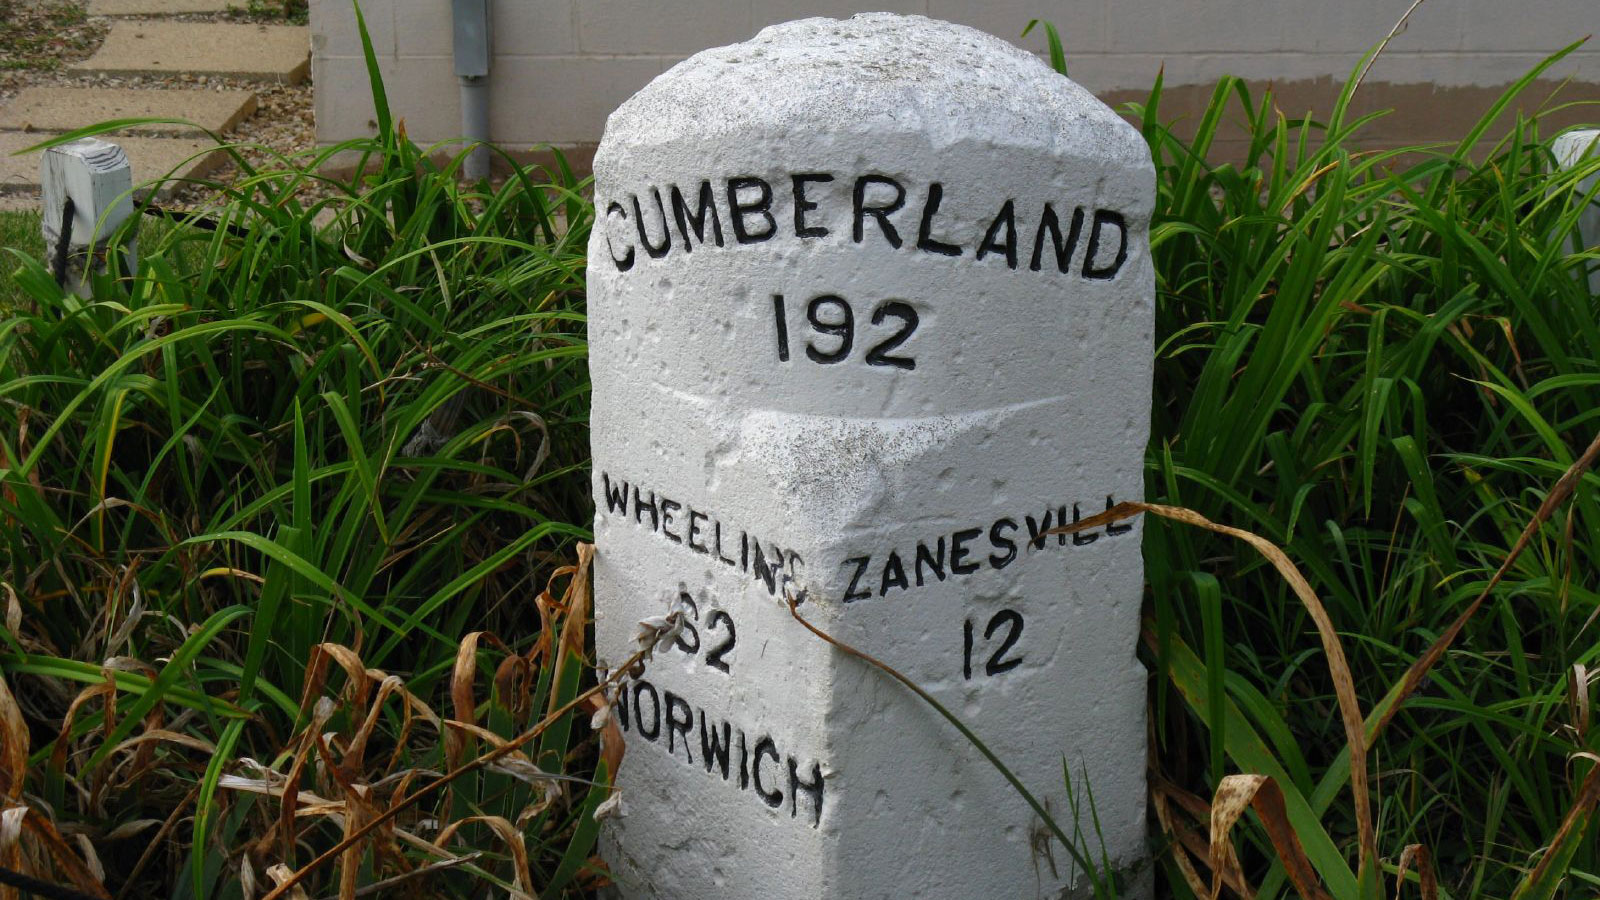 Several old mile markers still sit along the National Road